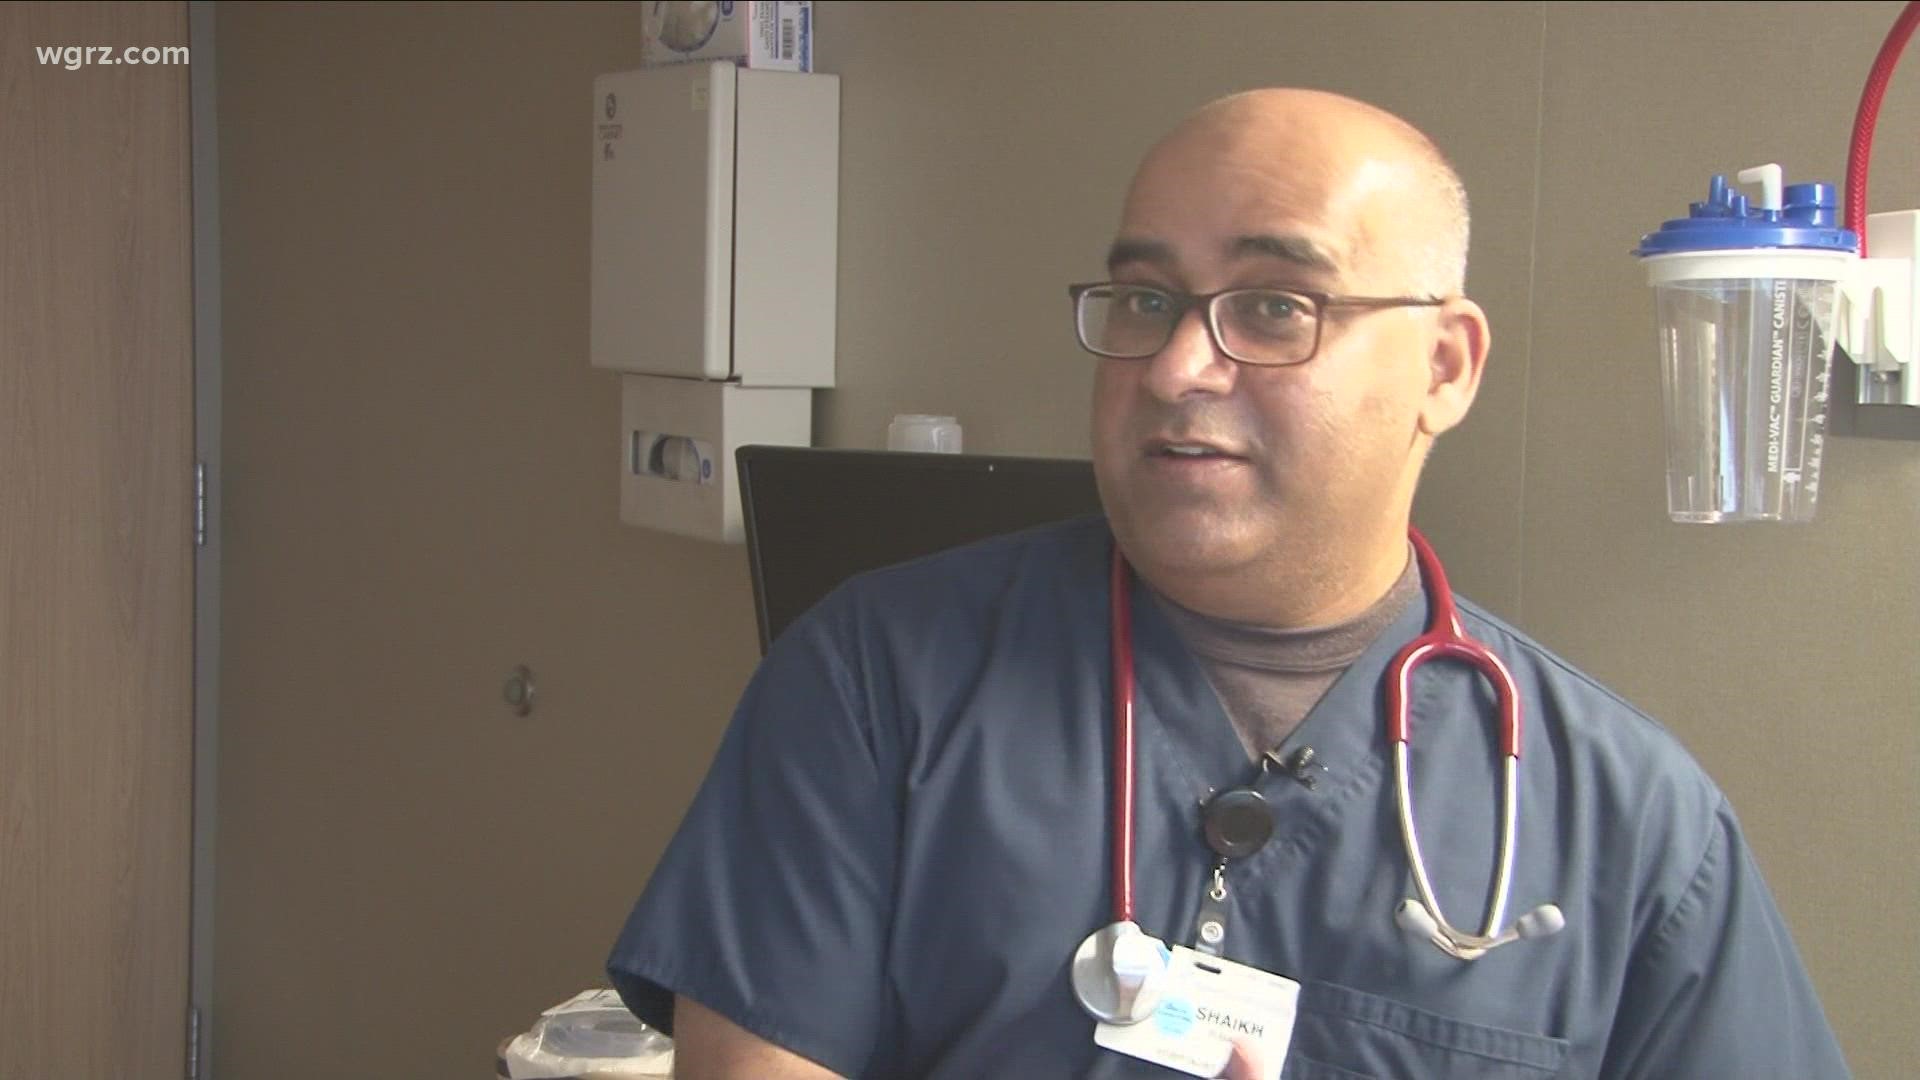 While every healthcare worker has been heroic throughout the pandemic, there is one doctor in Niagara Falls who we're shining a spotlight on.